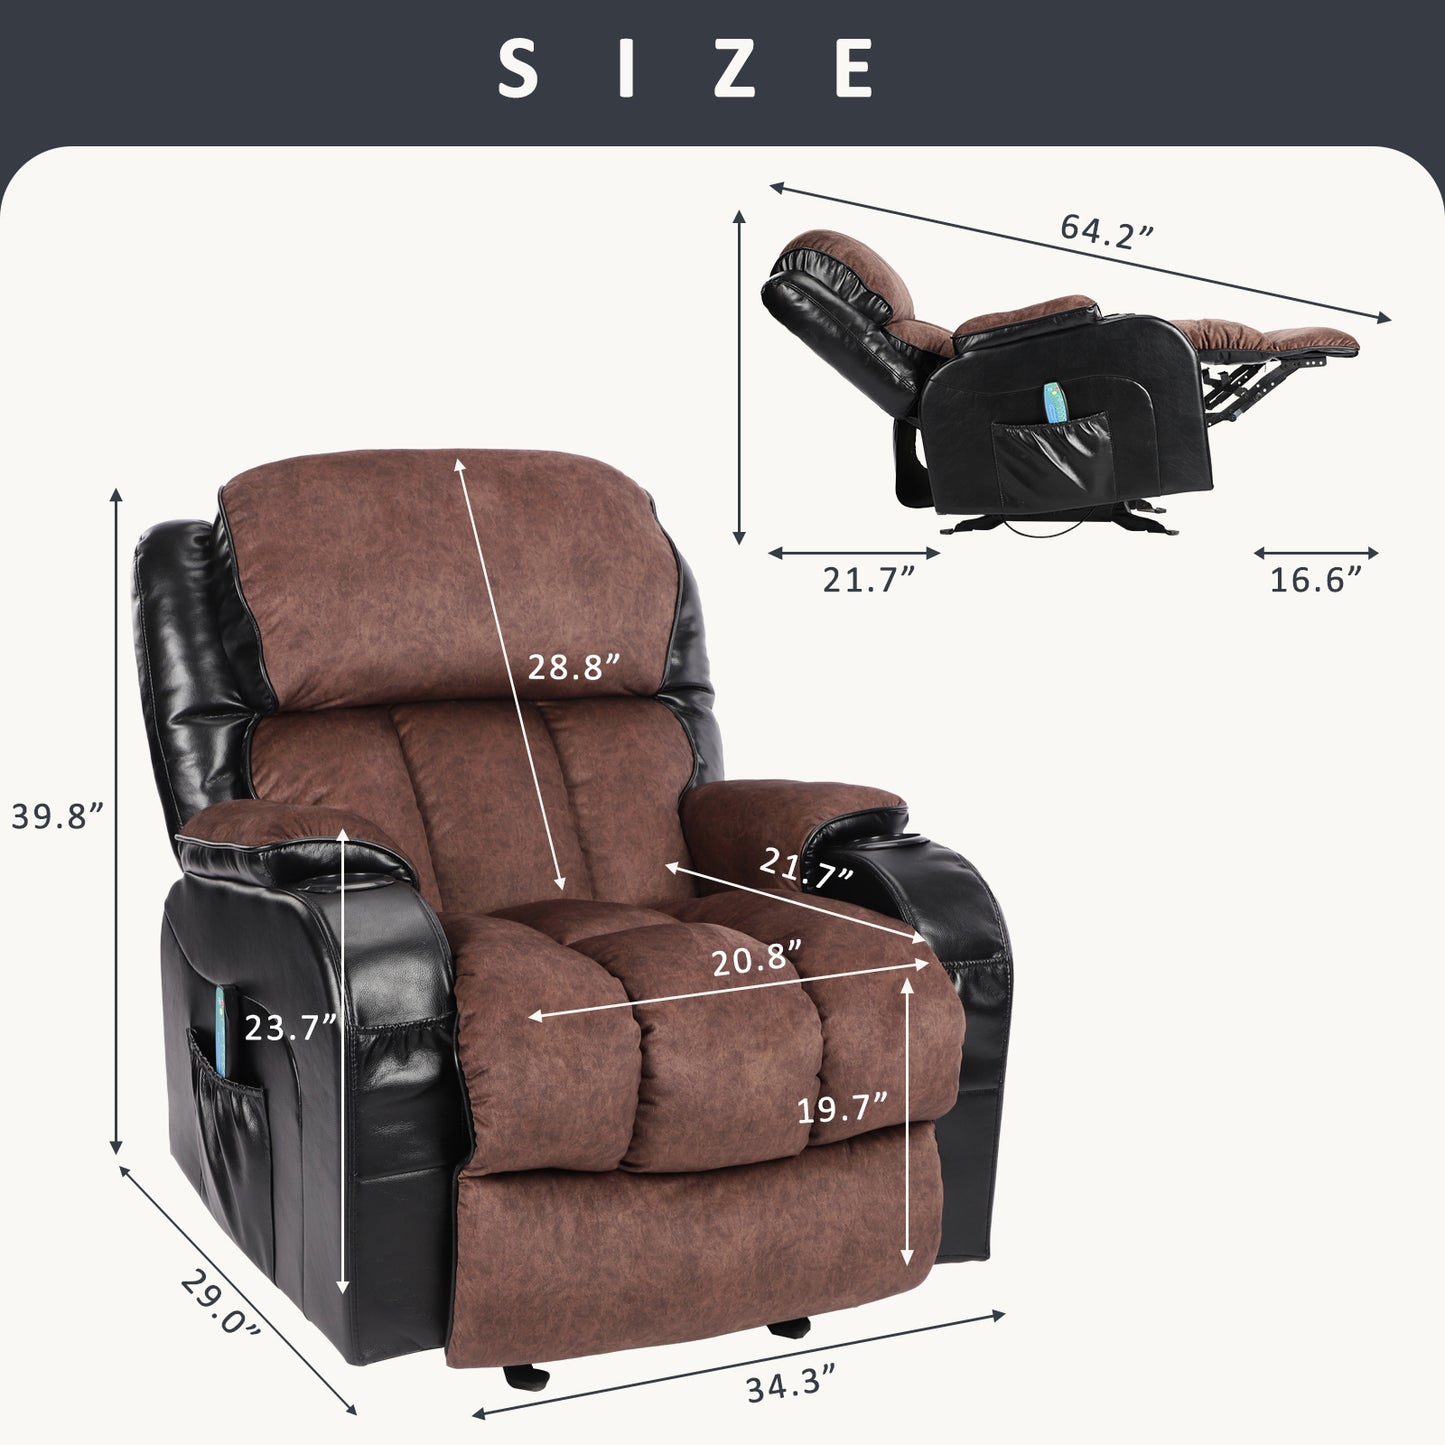 Recliner Chair for Living Room, Ergonomic Recliner Manual Recliner Chair with Cup Holders, USB, Heavy Duty Reclining Mechanism Elderly Single Recliner Rocker Sofa for Bedroom Home Theater, Brown